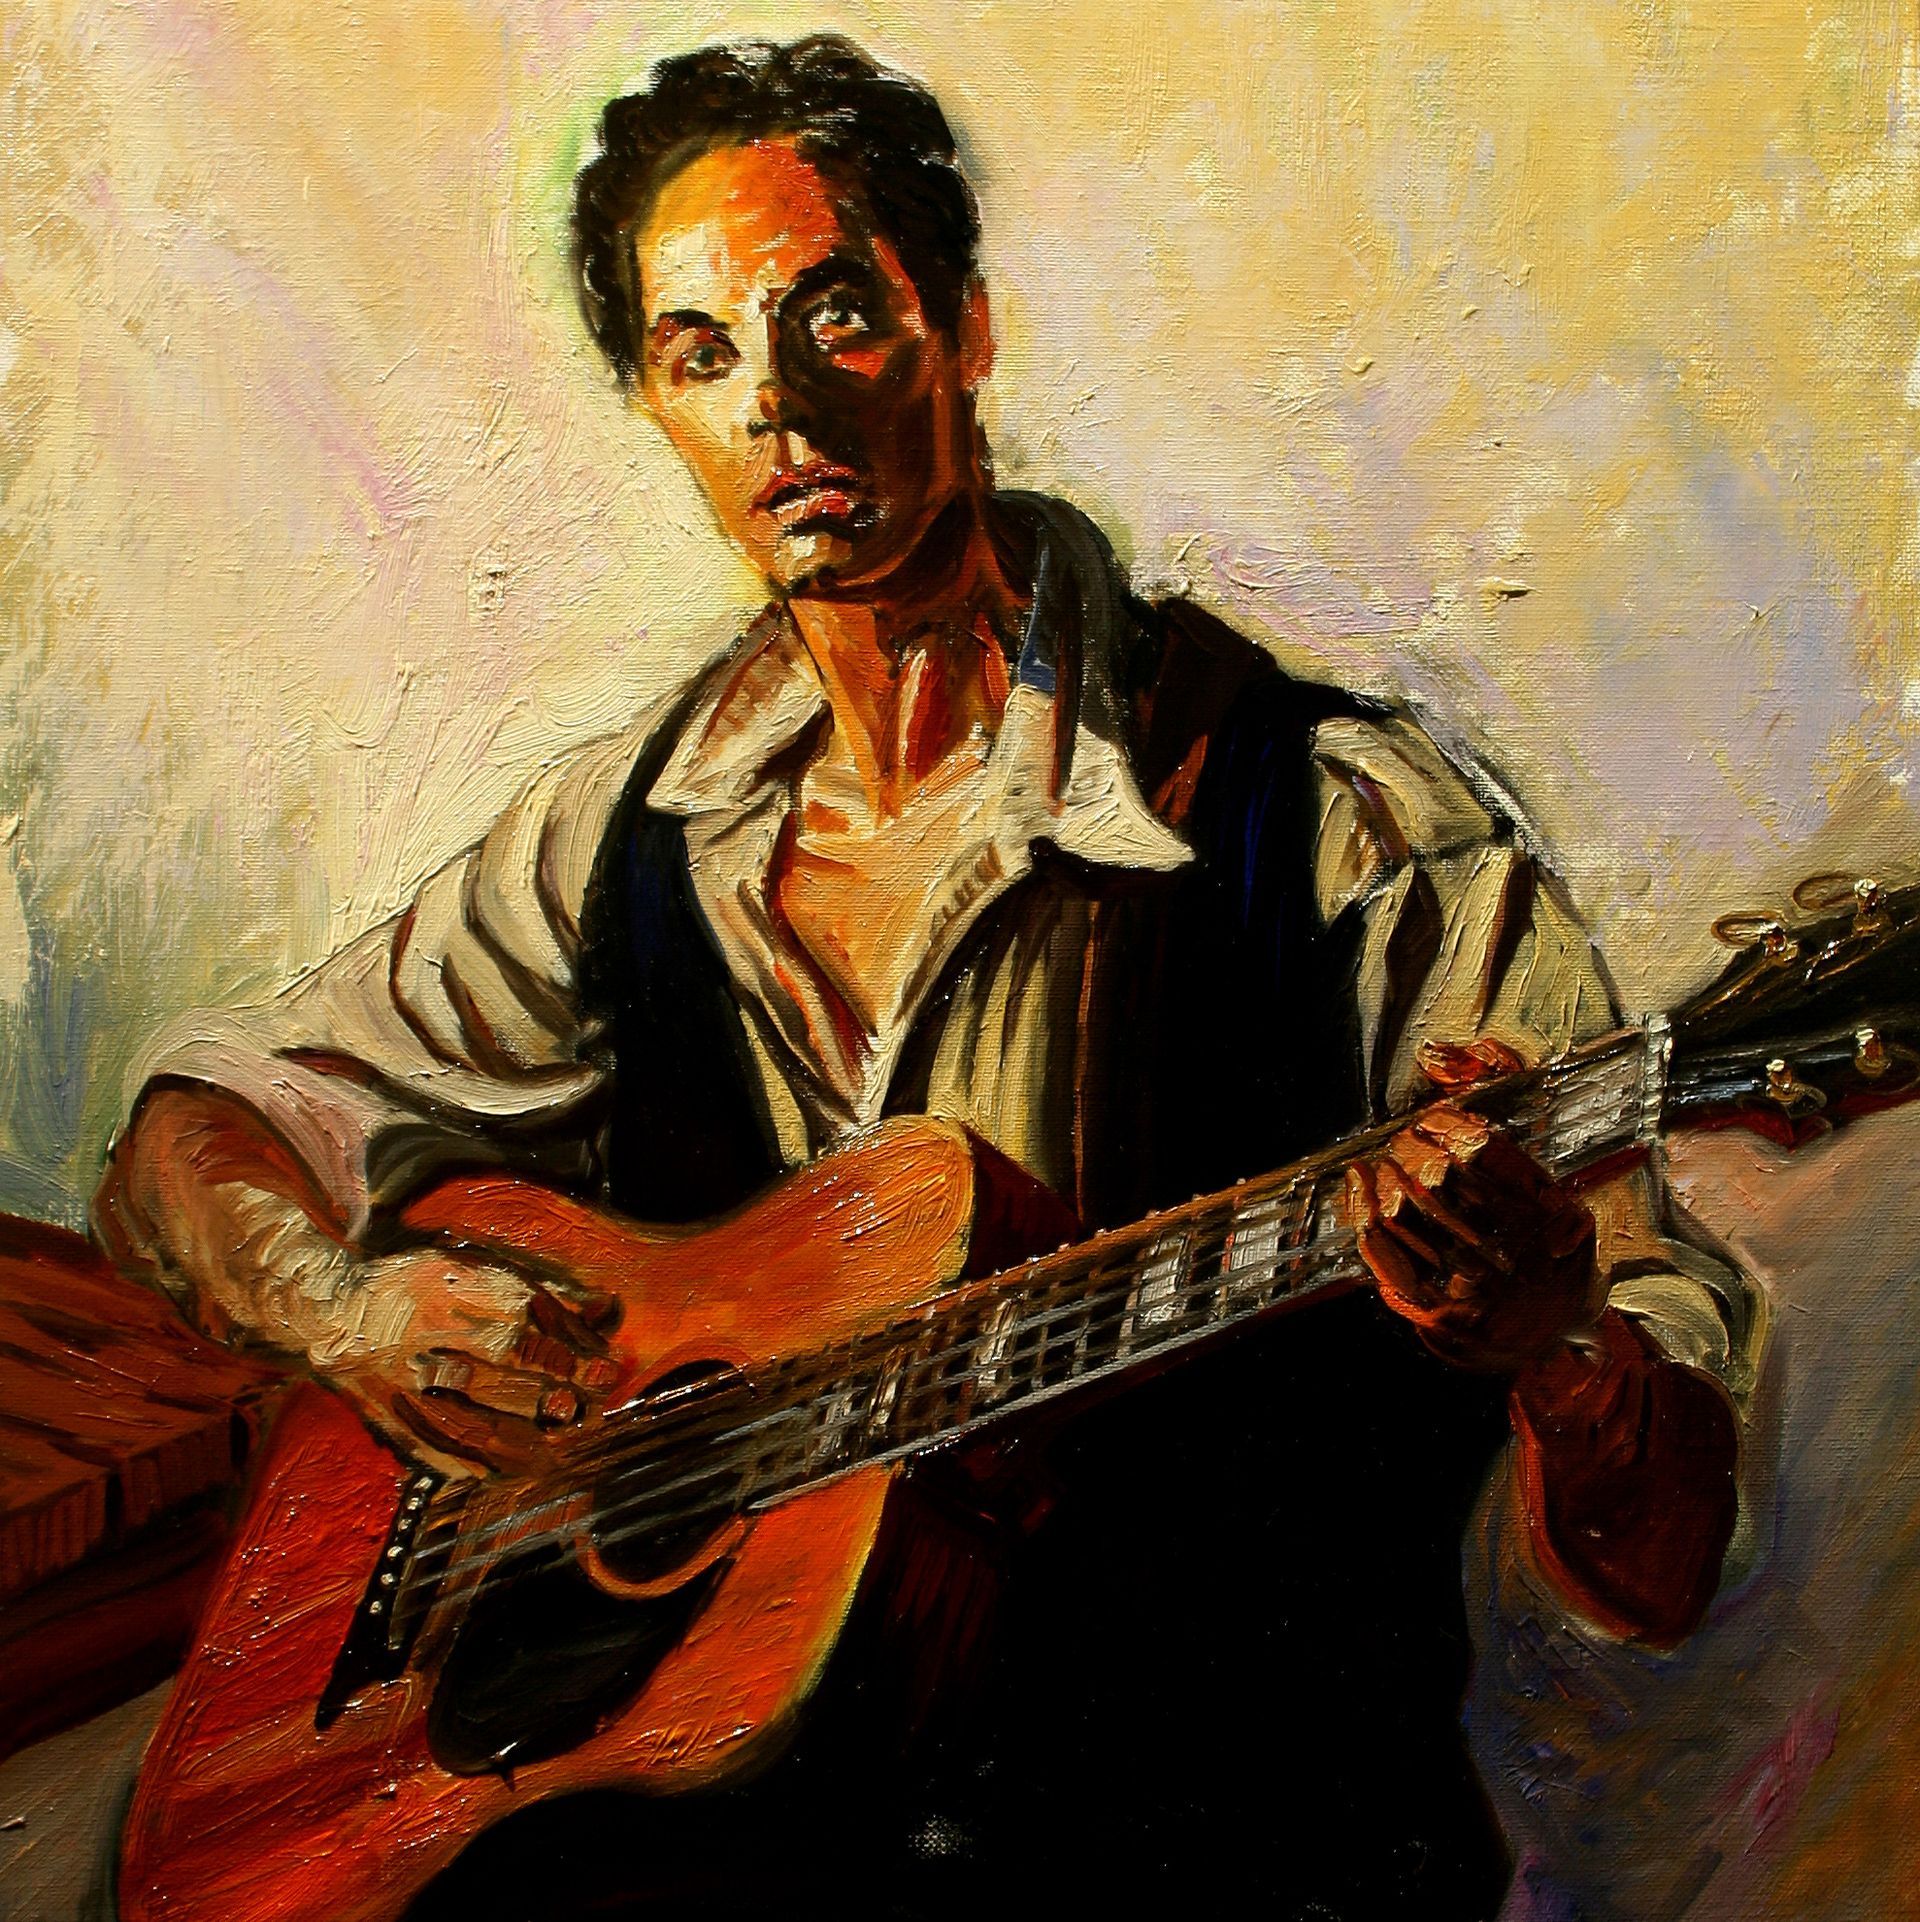 The Folk Singer | Figurative Oil Painting on Canvas